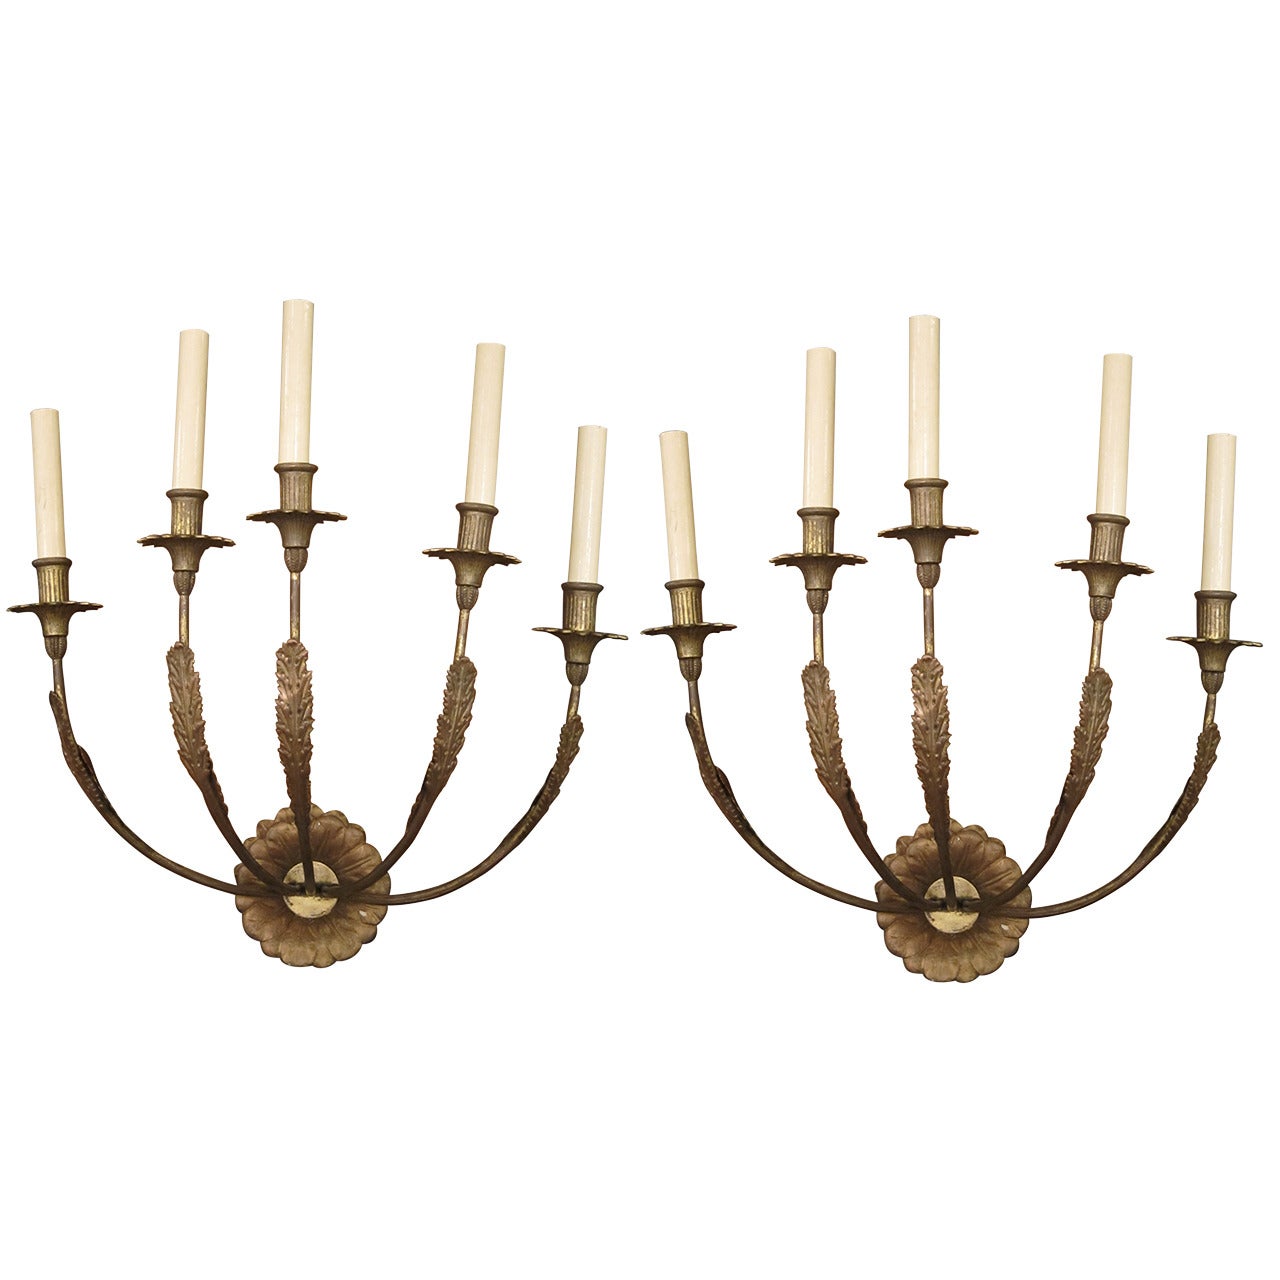 1890s Pair of Five-Light Victorian Sconces with Gesso Leaves